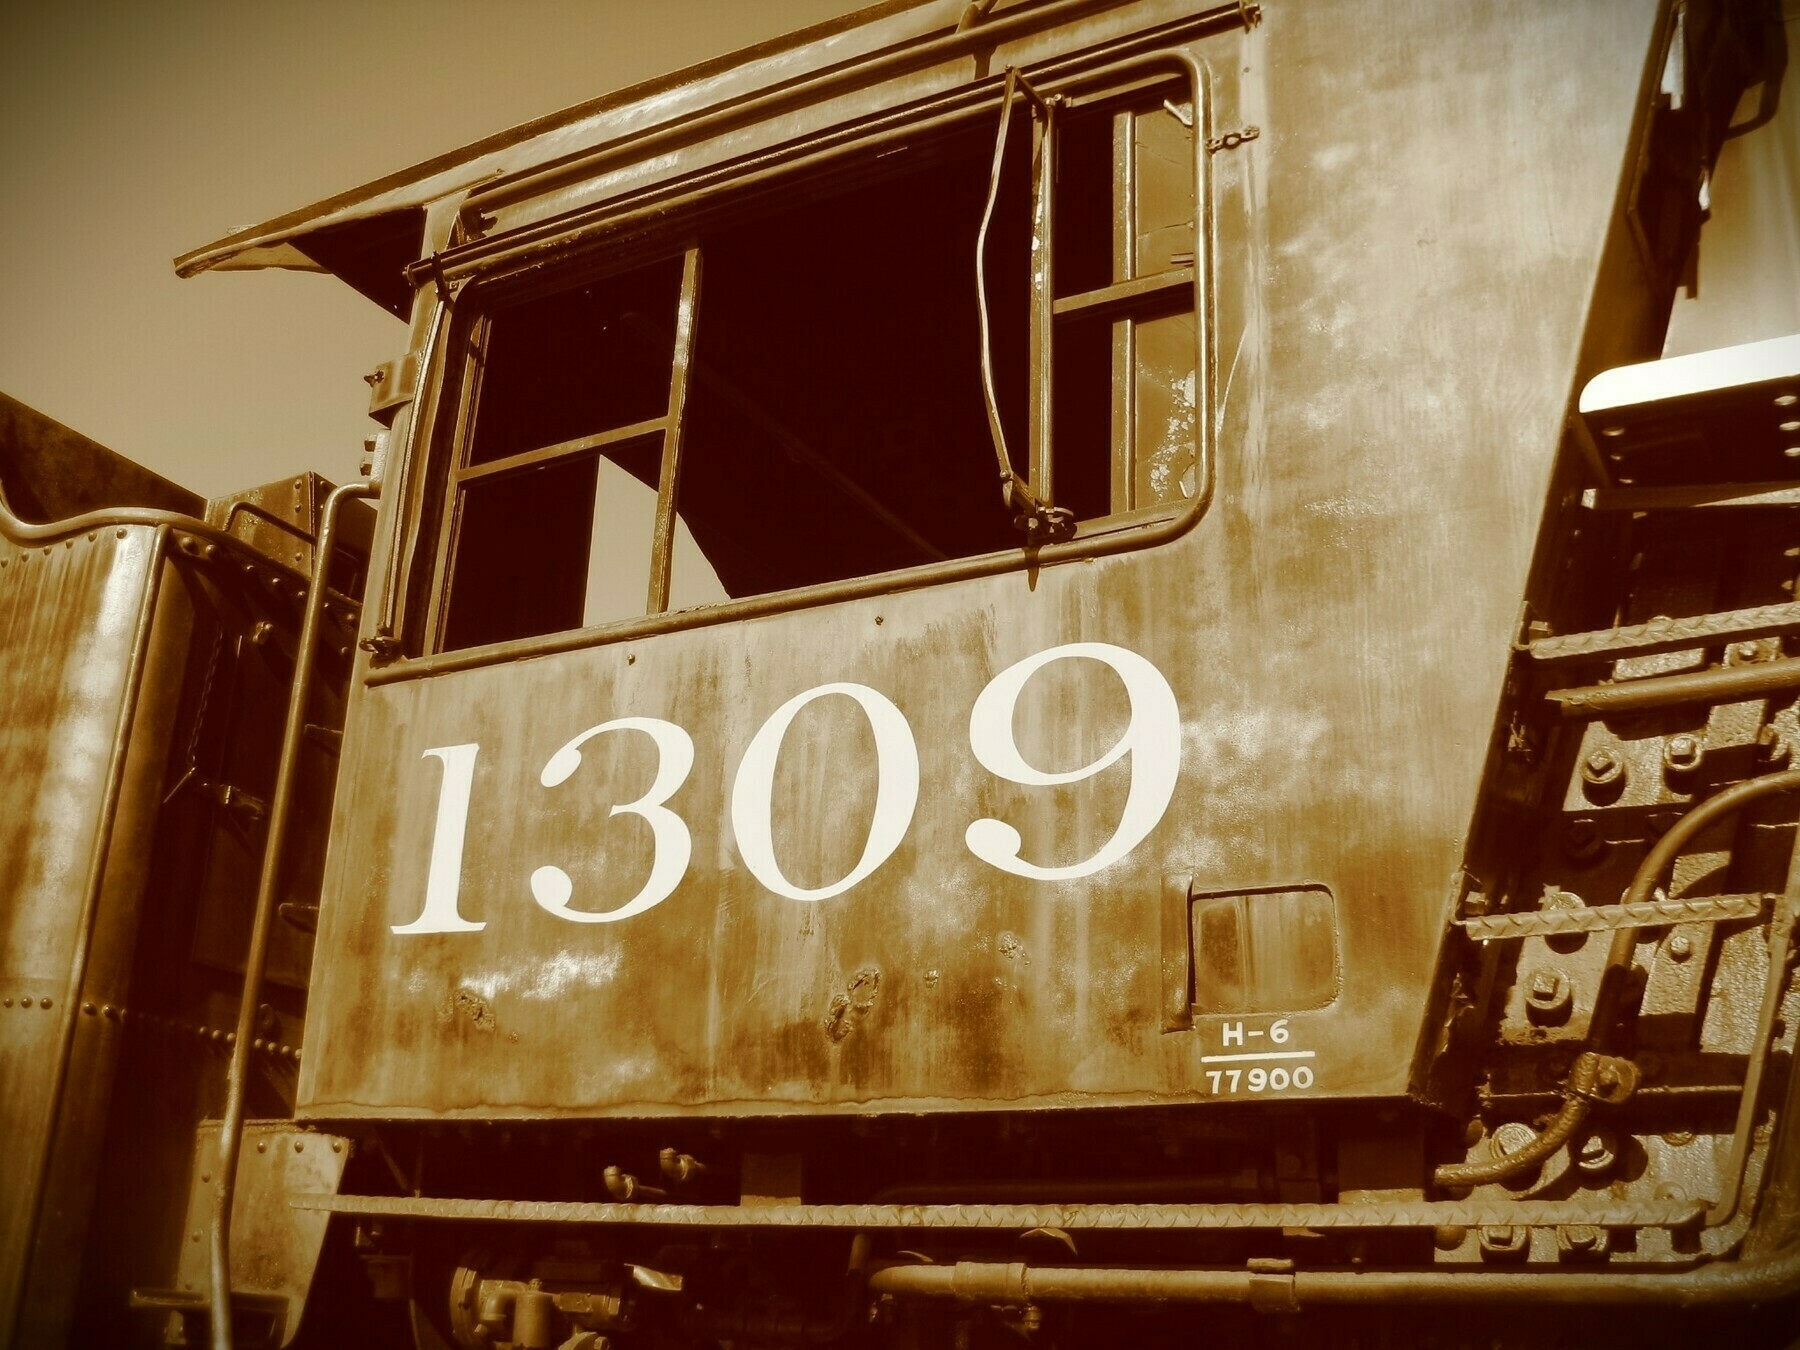 Sepia tone. Locomotive cab with the number 1309 painted on it.